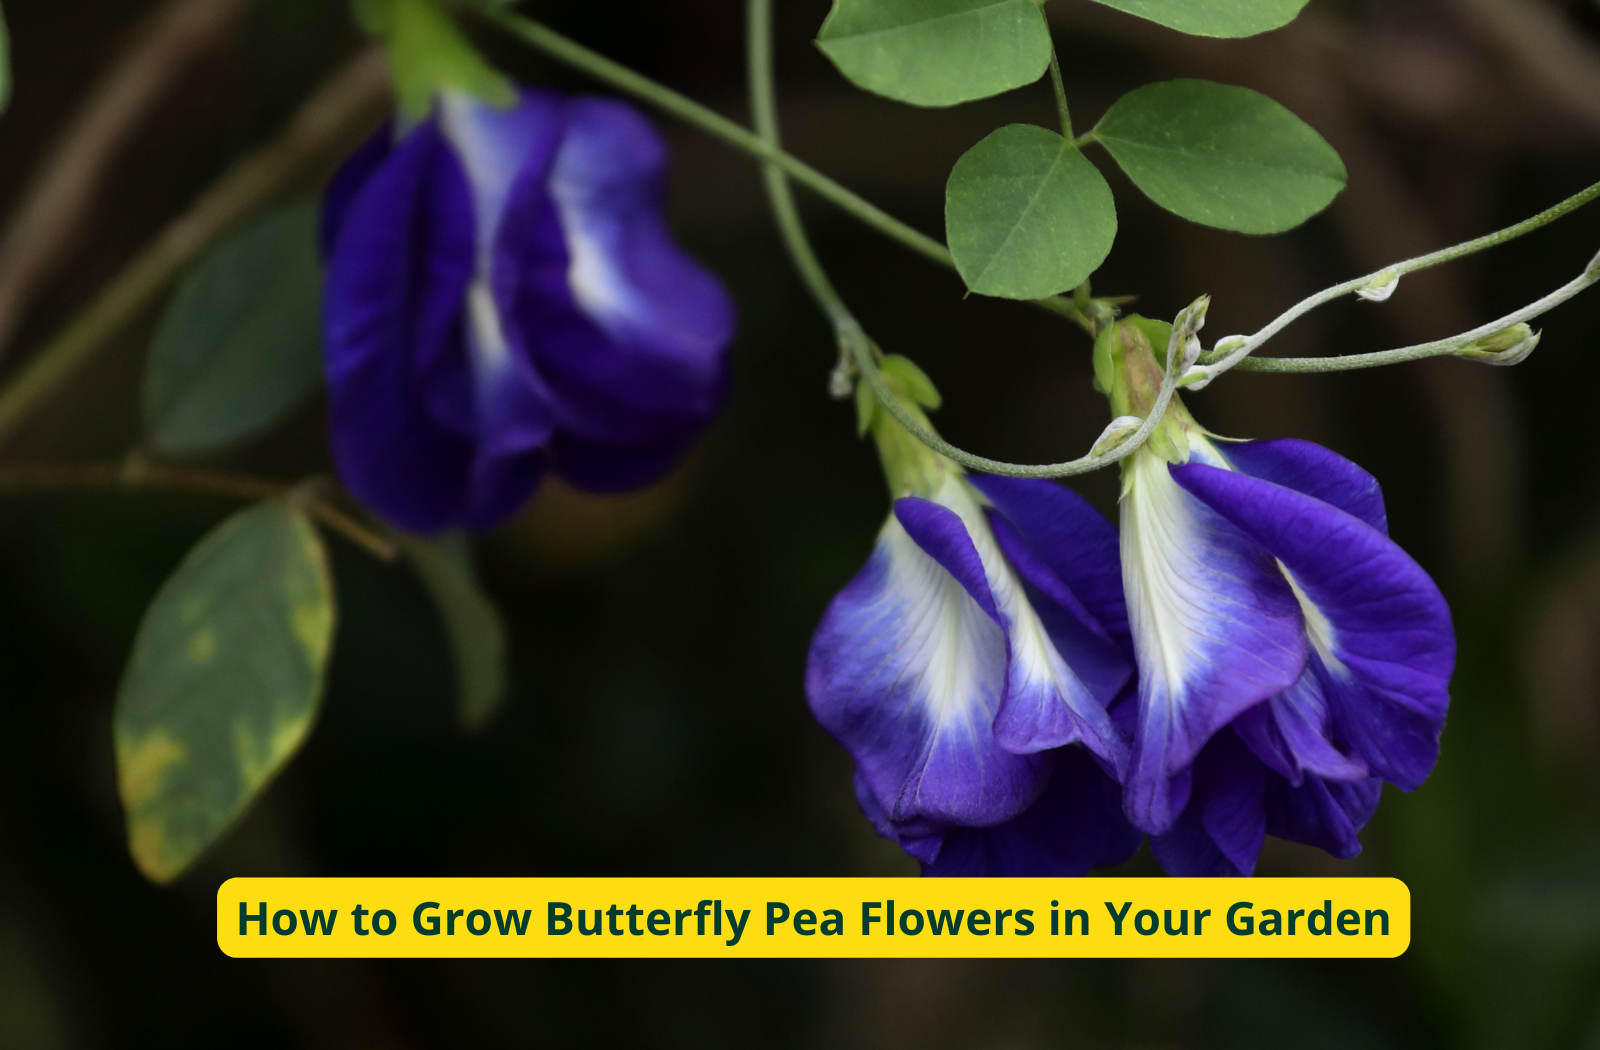 How to Grow Butterfly Pea Flowers in Your Garden